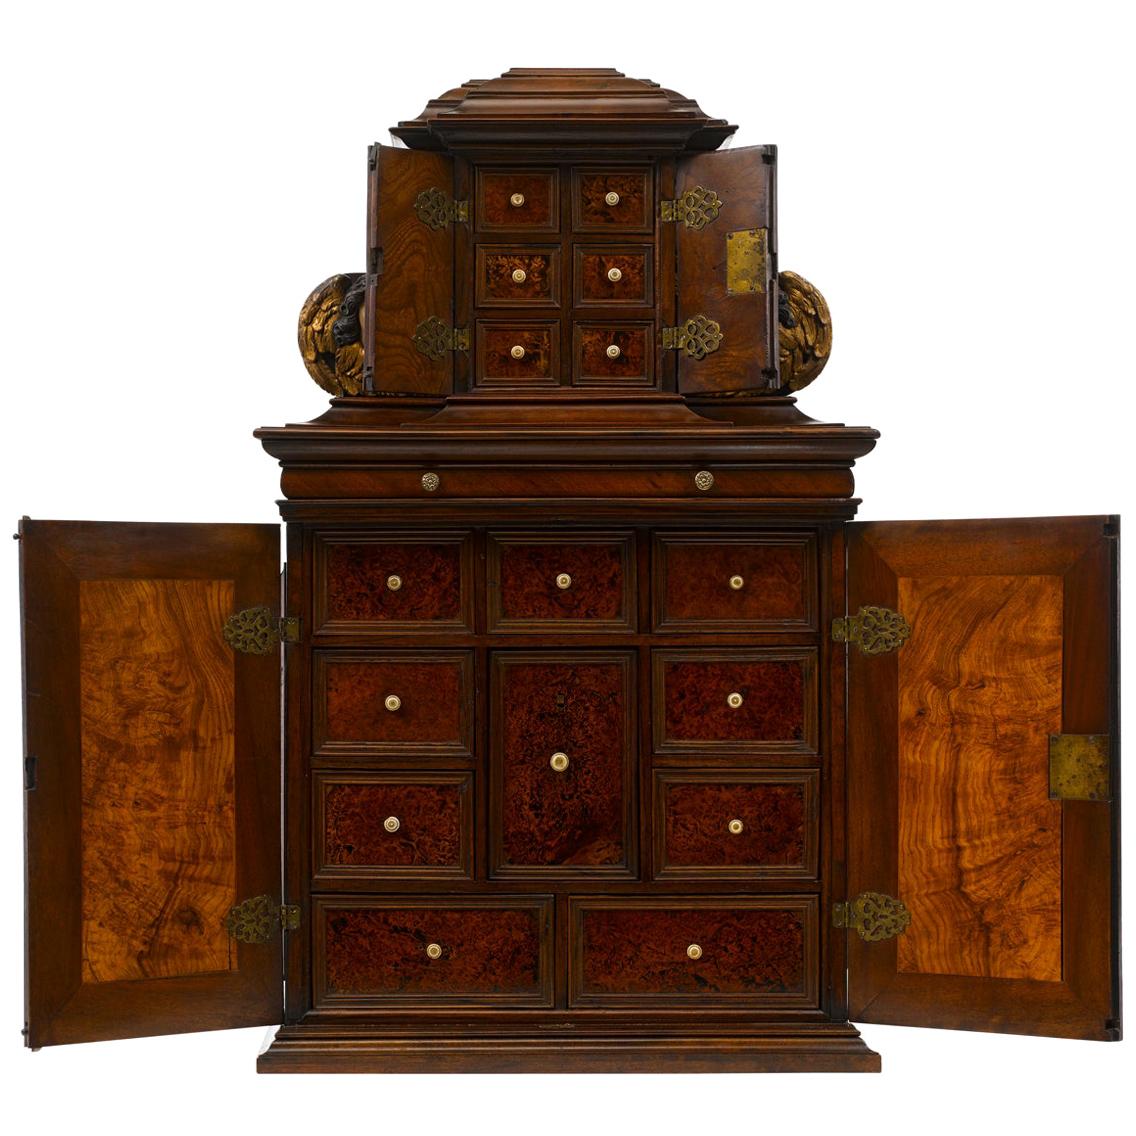 Rare 17th Century Baroque Cabinet, South Germany Probably Augsburg, Wunderkammer